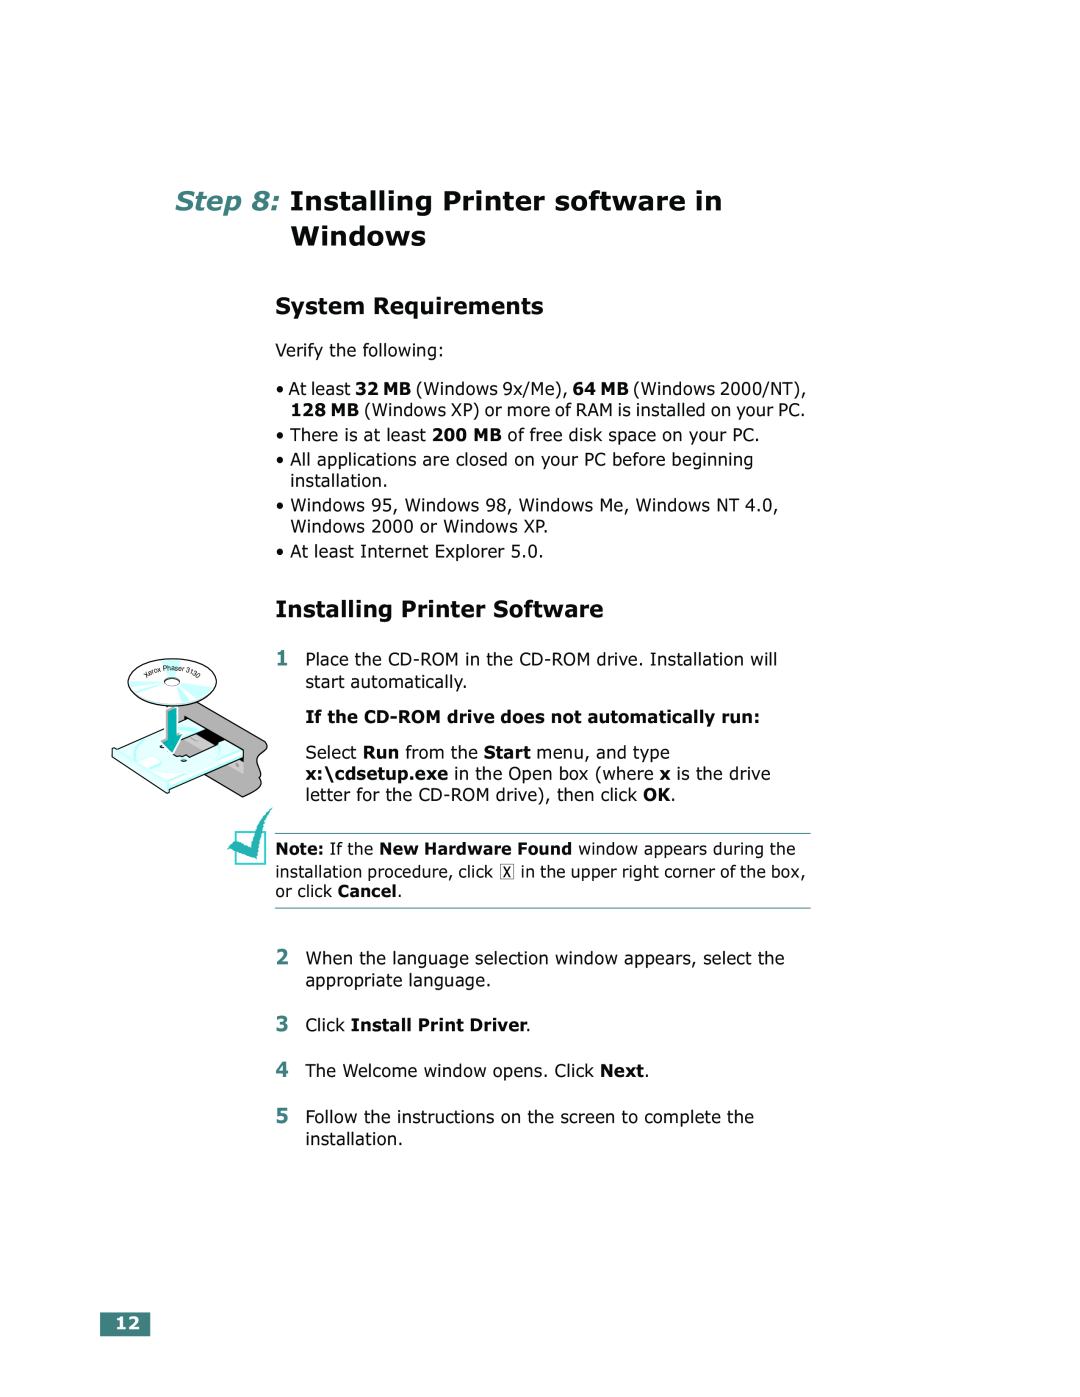 Xerox Phaser 3130 manual Installing Printer software in Windows, System Requirements, Installing Printer Software 